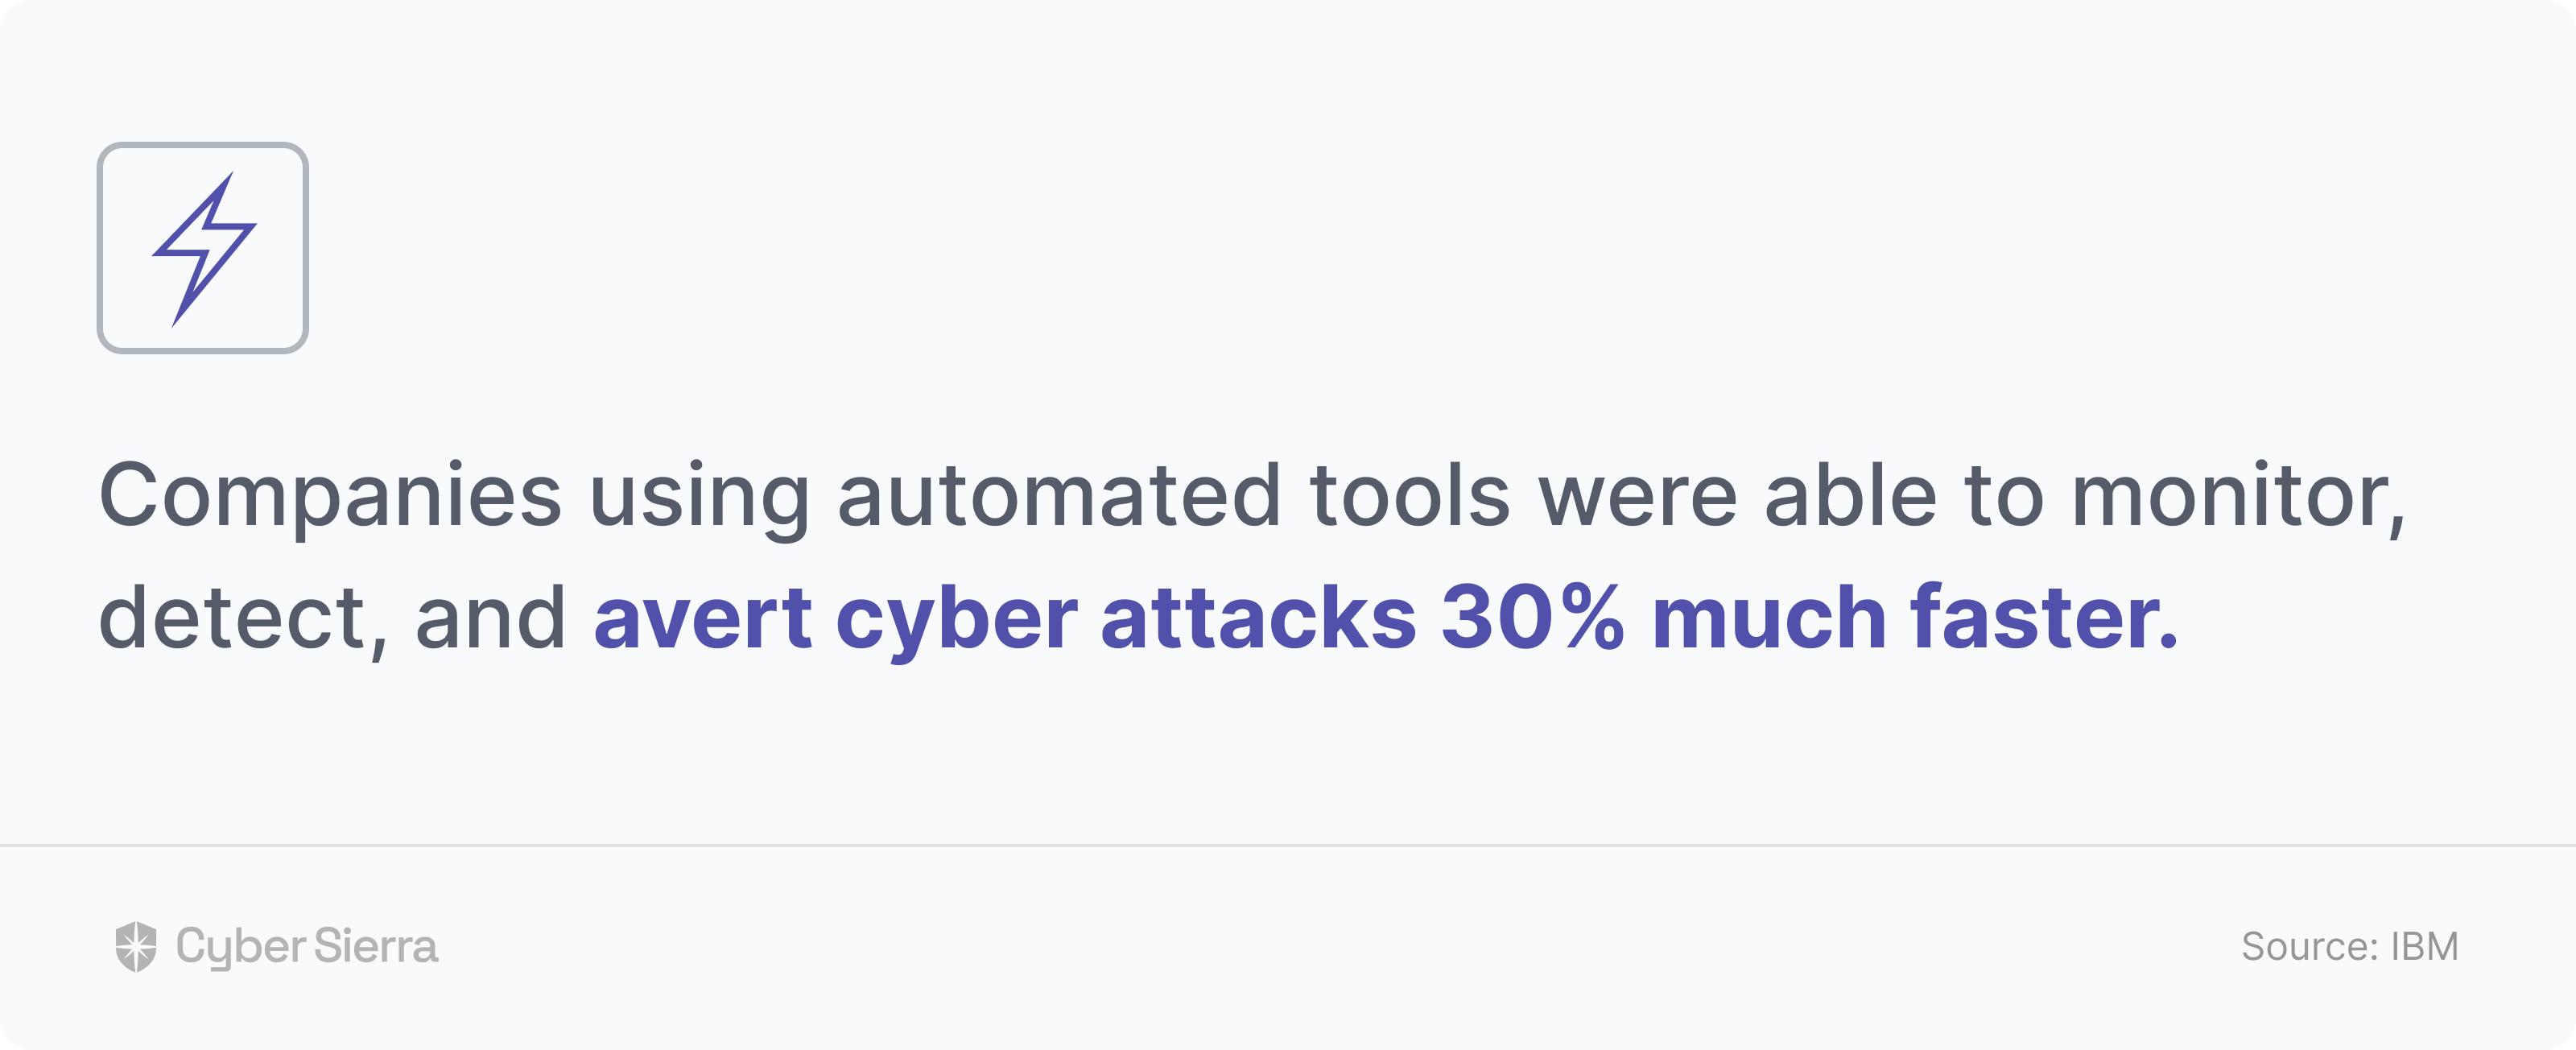 It found that companies using automated cybersecurity tools cut those data breach losses by up to US$3 million. More importantly, they were able to detect and respond to cyber threats much faster